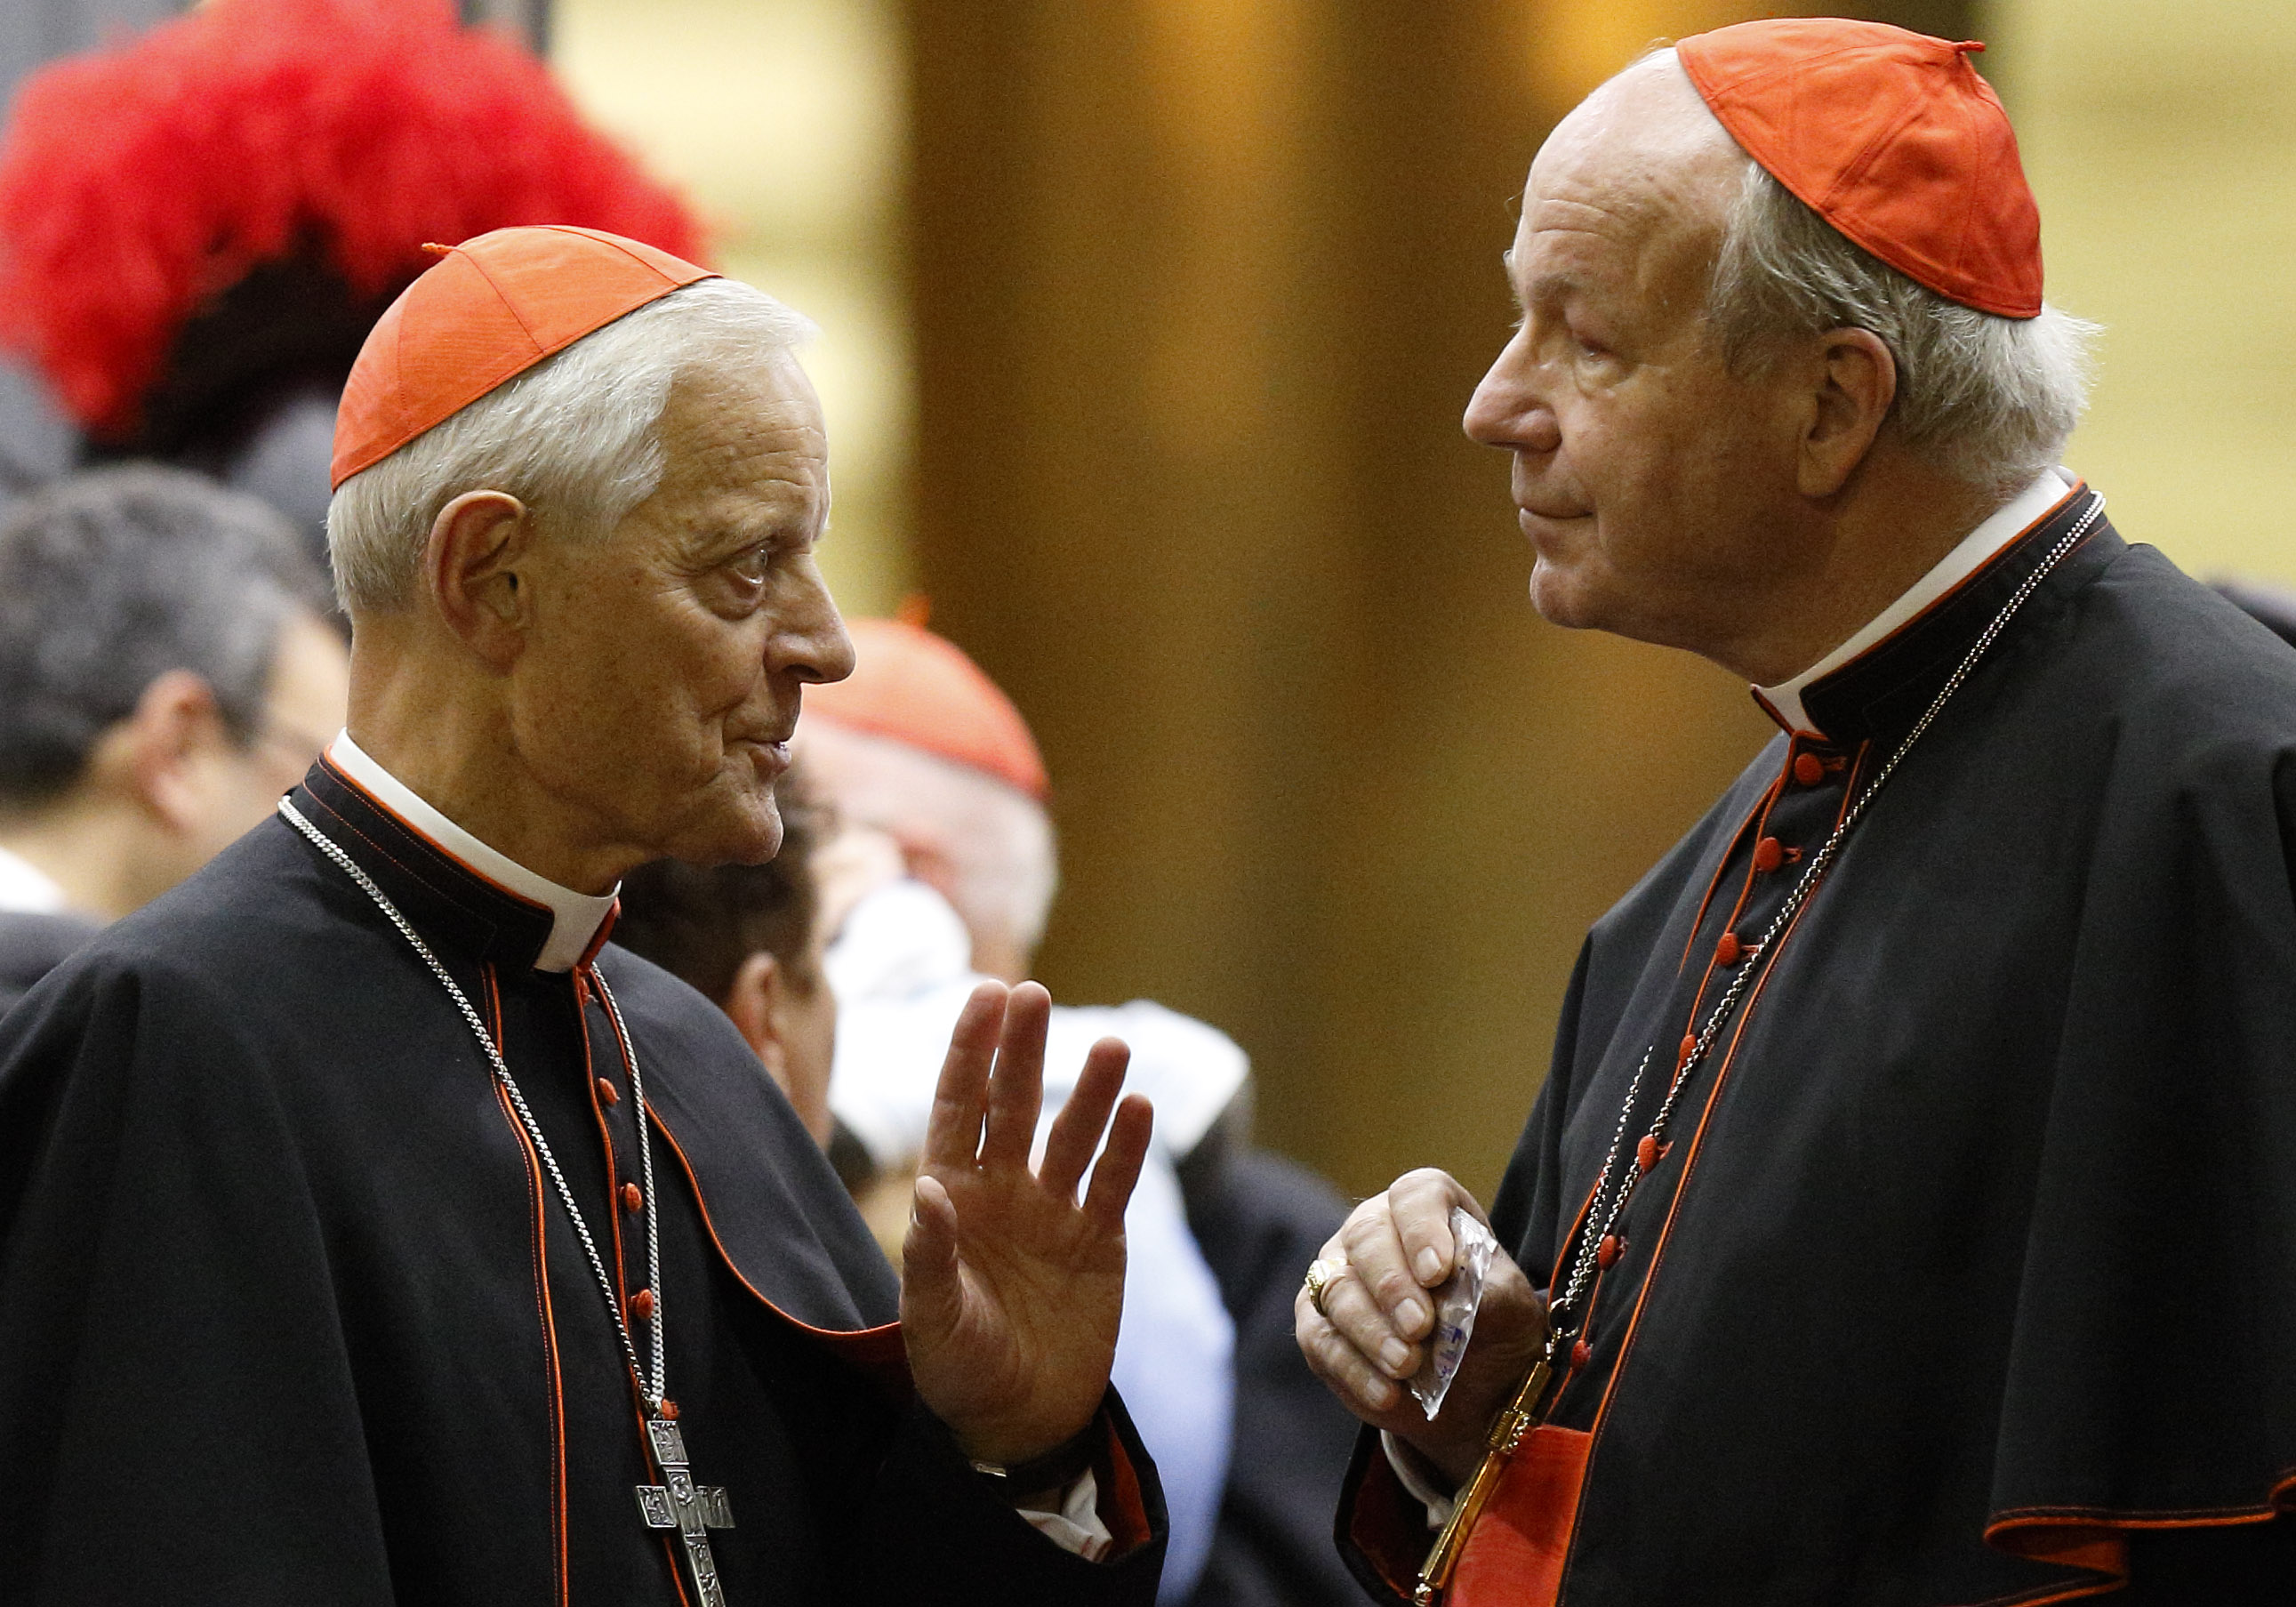 Cardinal Donald W. Wuerl of Washington, left, talks with Cardinal Christoph Schonborn of Vienna as they leave the opening session of the Synod of Bishops on the family at the Vatican Oct. 5, 2015 (CNS/Paul Haring)